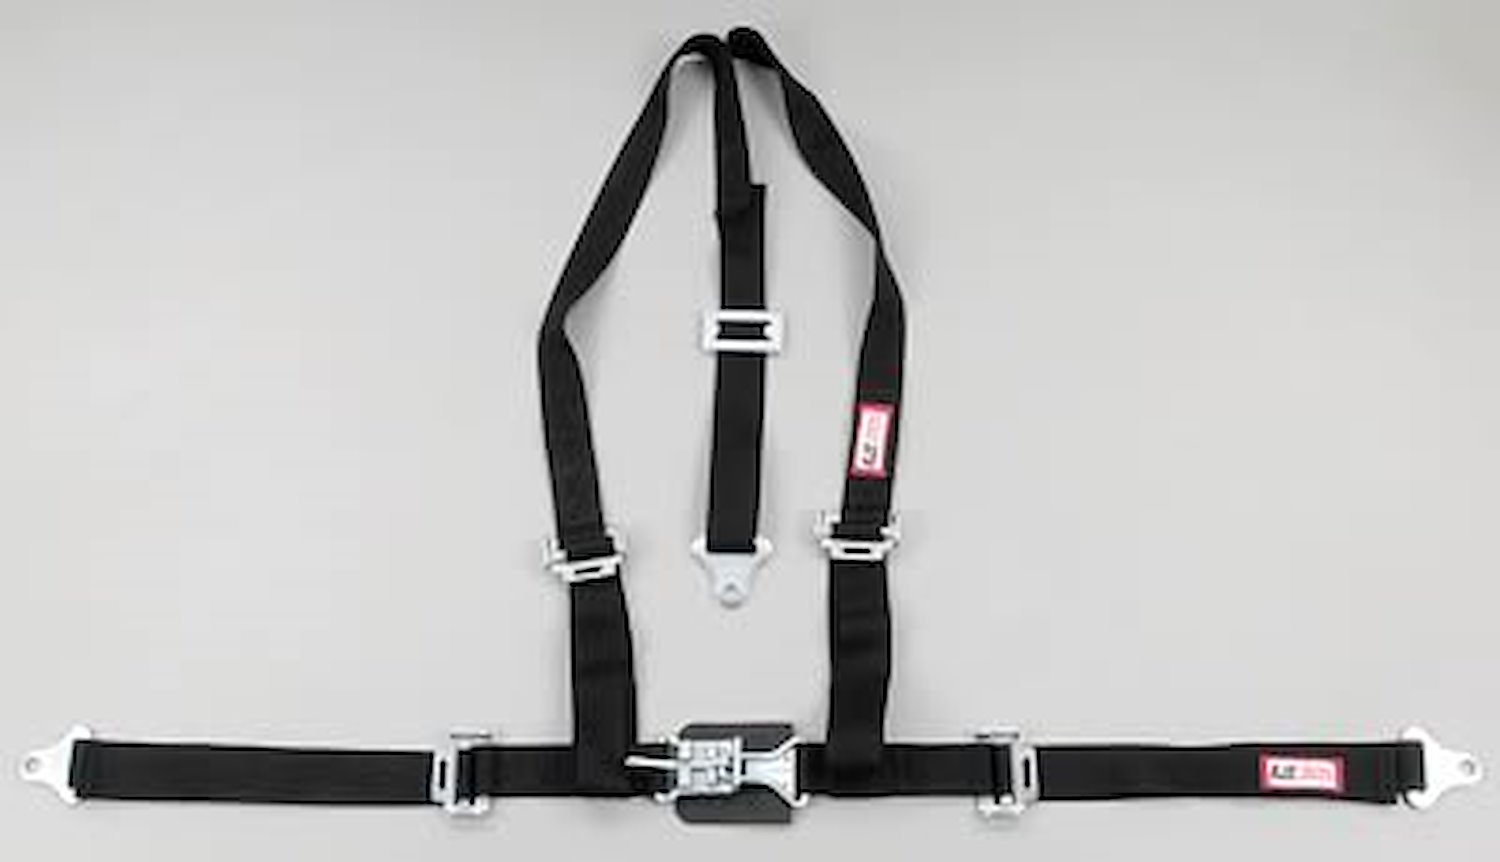 NON-SFI L&L HARNESS 2 PULL UP Lap Belt SEWN IN 2 S.H. INDIVIDUAL FLOOR Mount w/STERNUM STRAP ALL WRAP ENDS OD GREEN